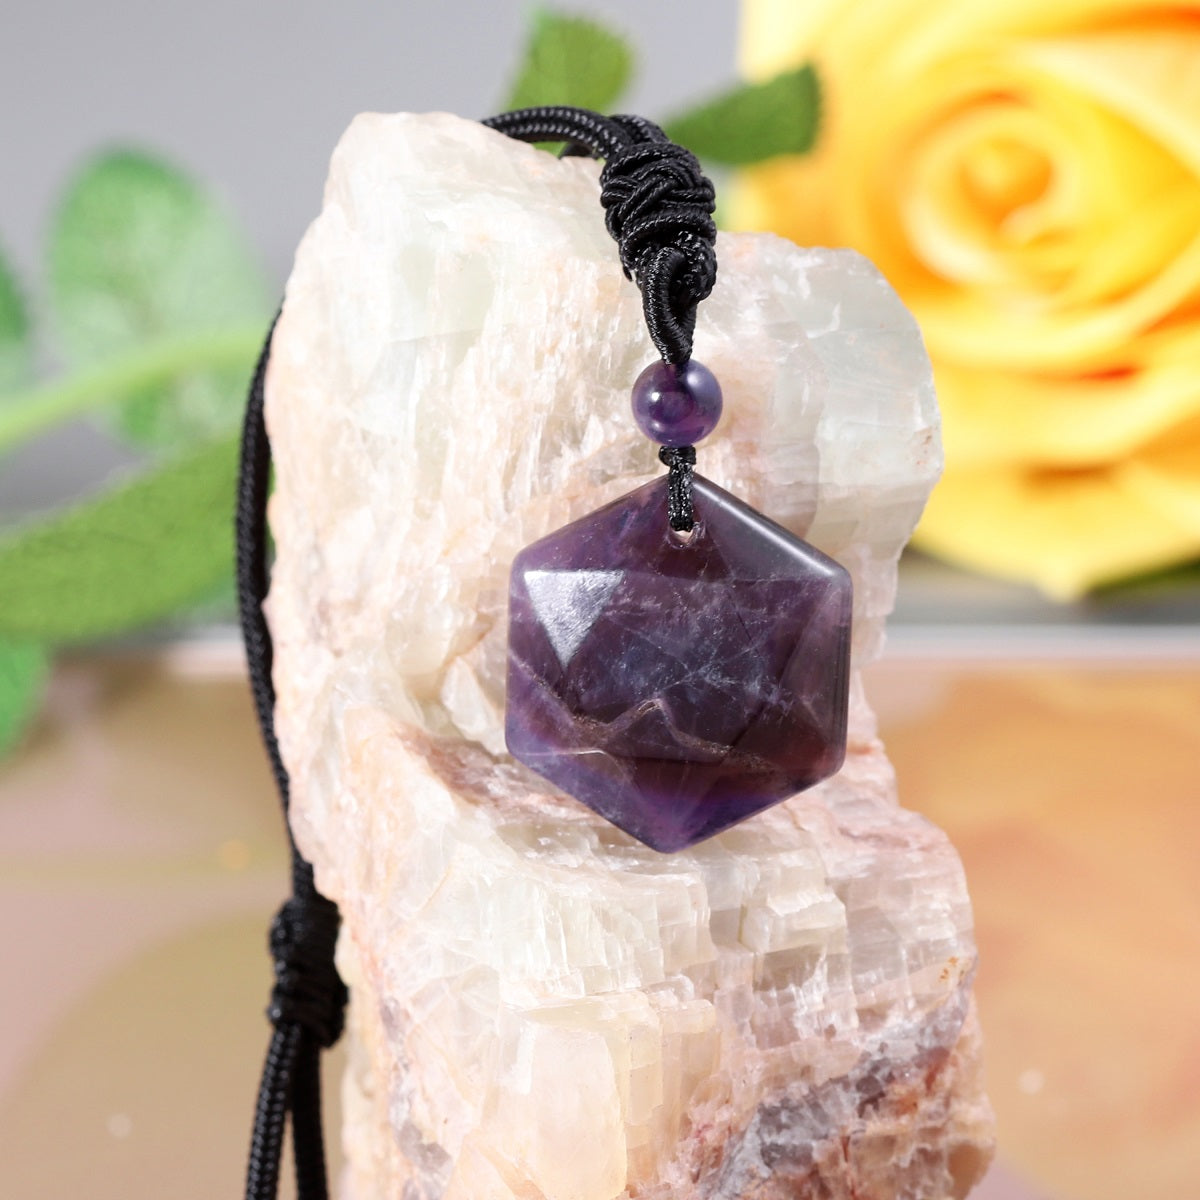 A detailed view of the artistic and intricate wrapping design that surrounds the amethyst gemstone, adding a touch of elegance to the pendant necklace.